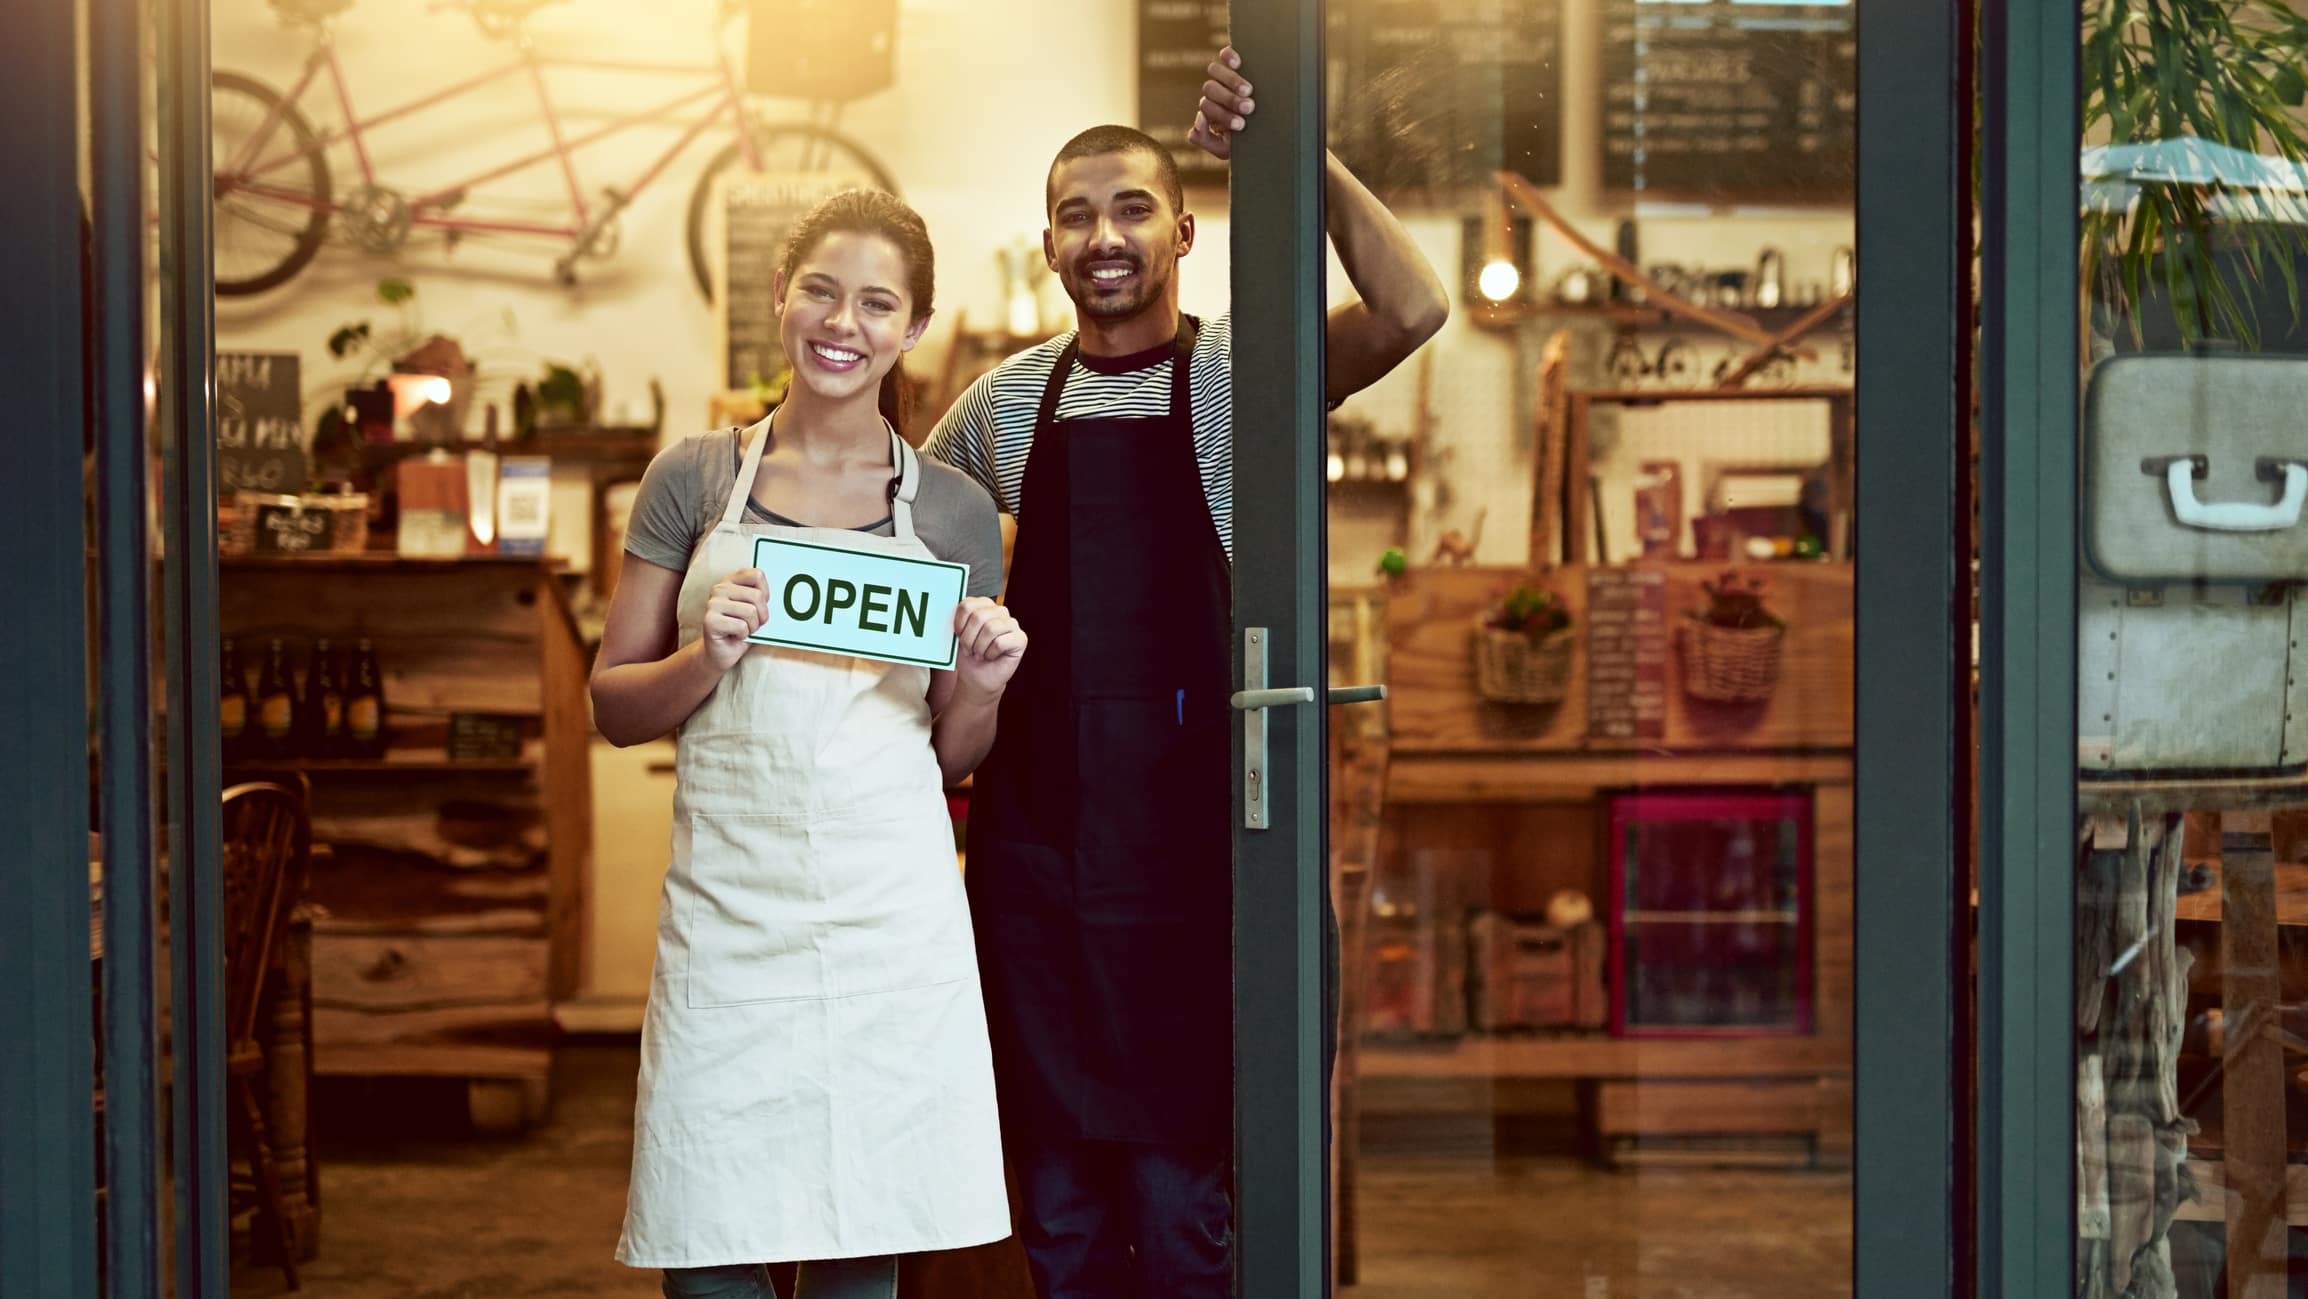 Portrait of a young man and woman holding up an open sign in their store